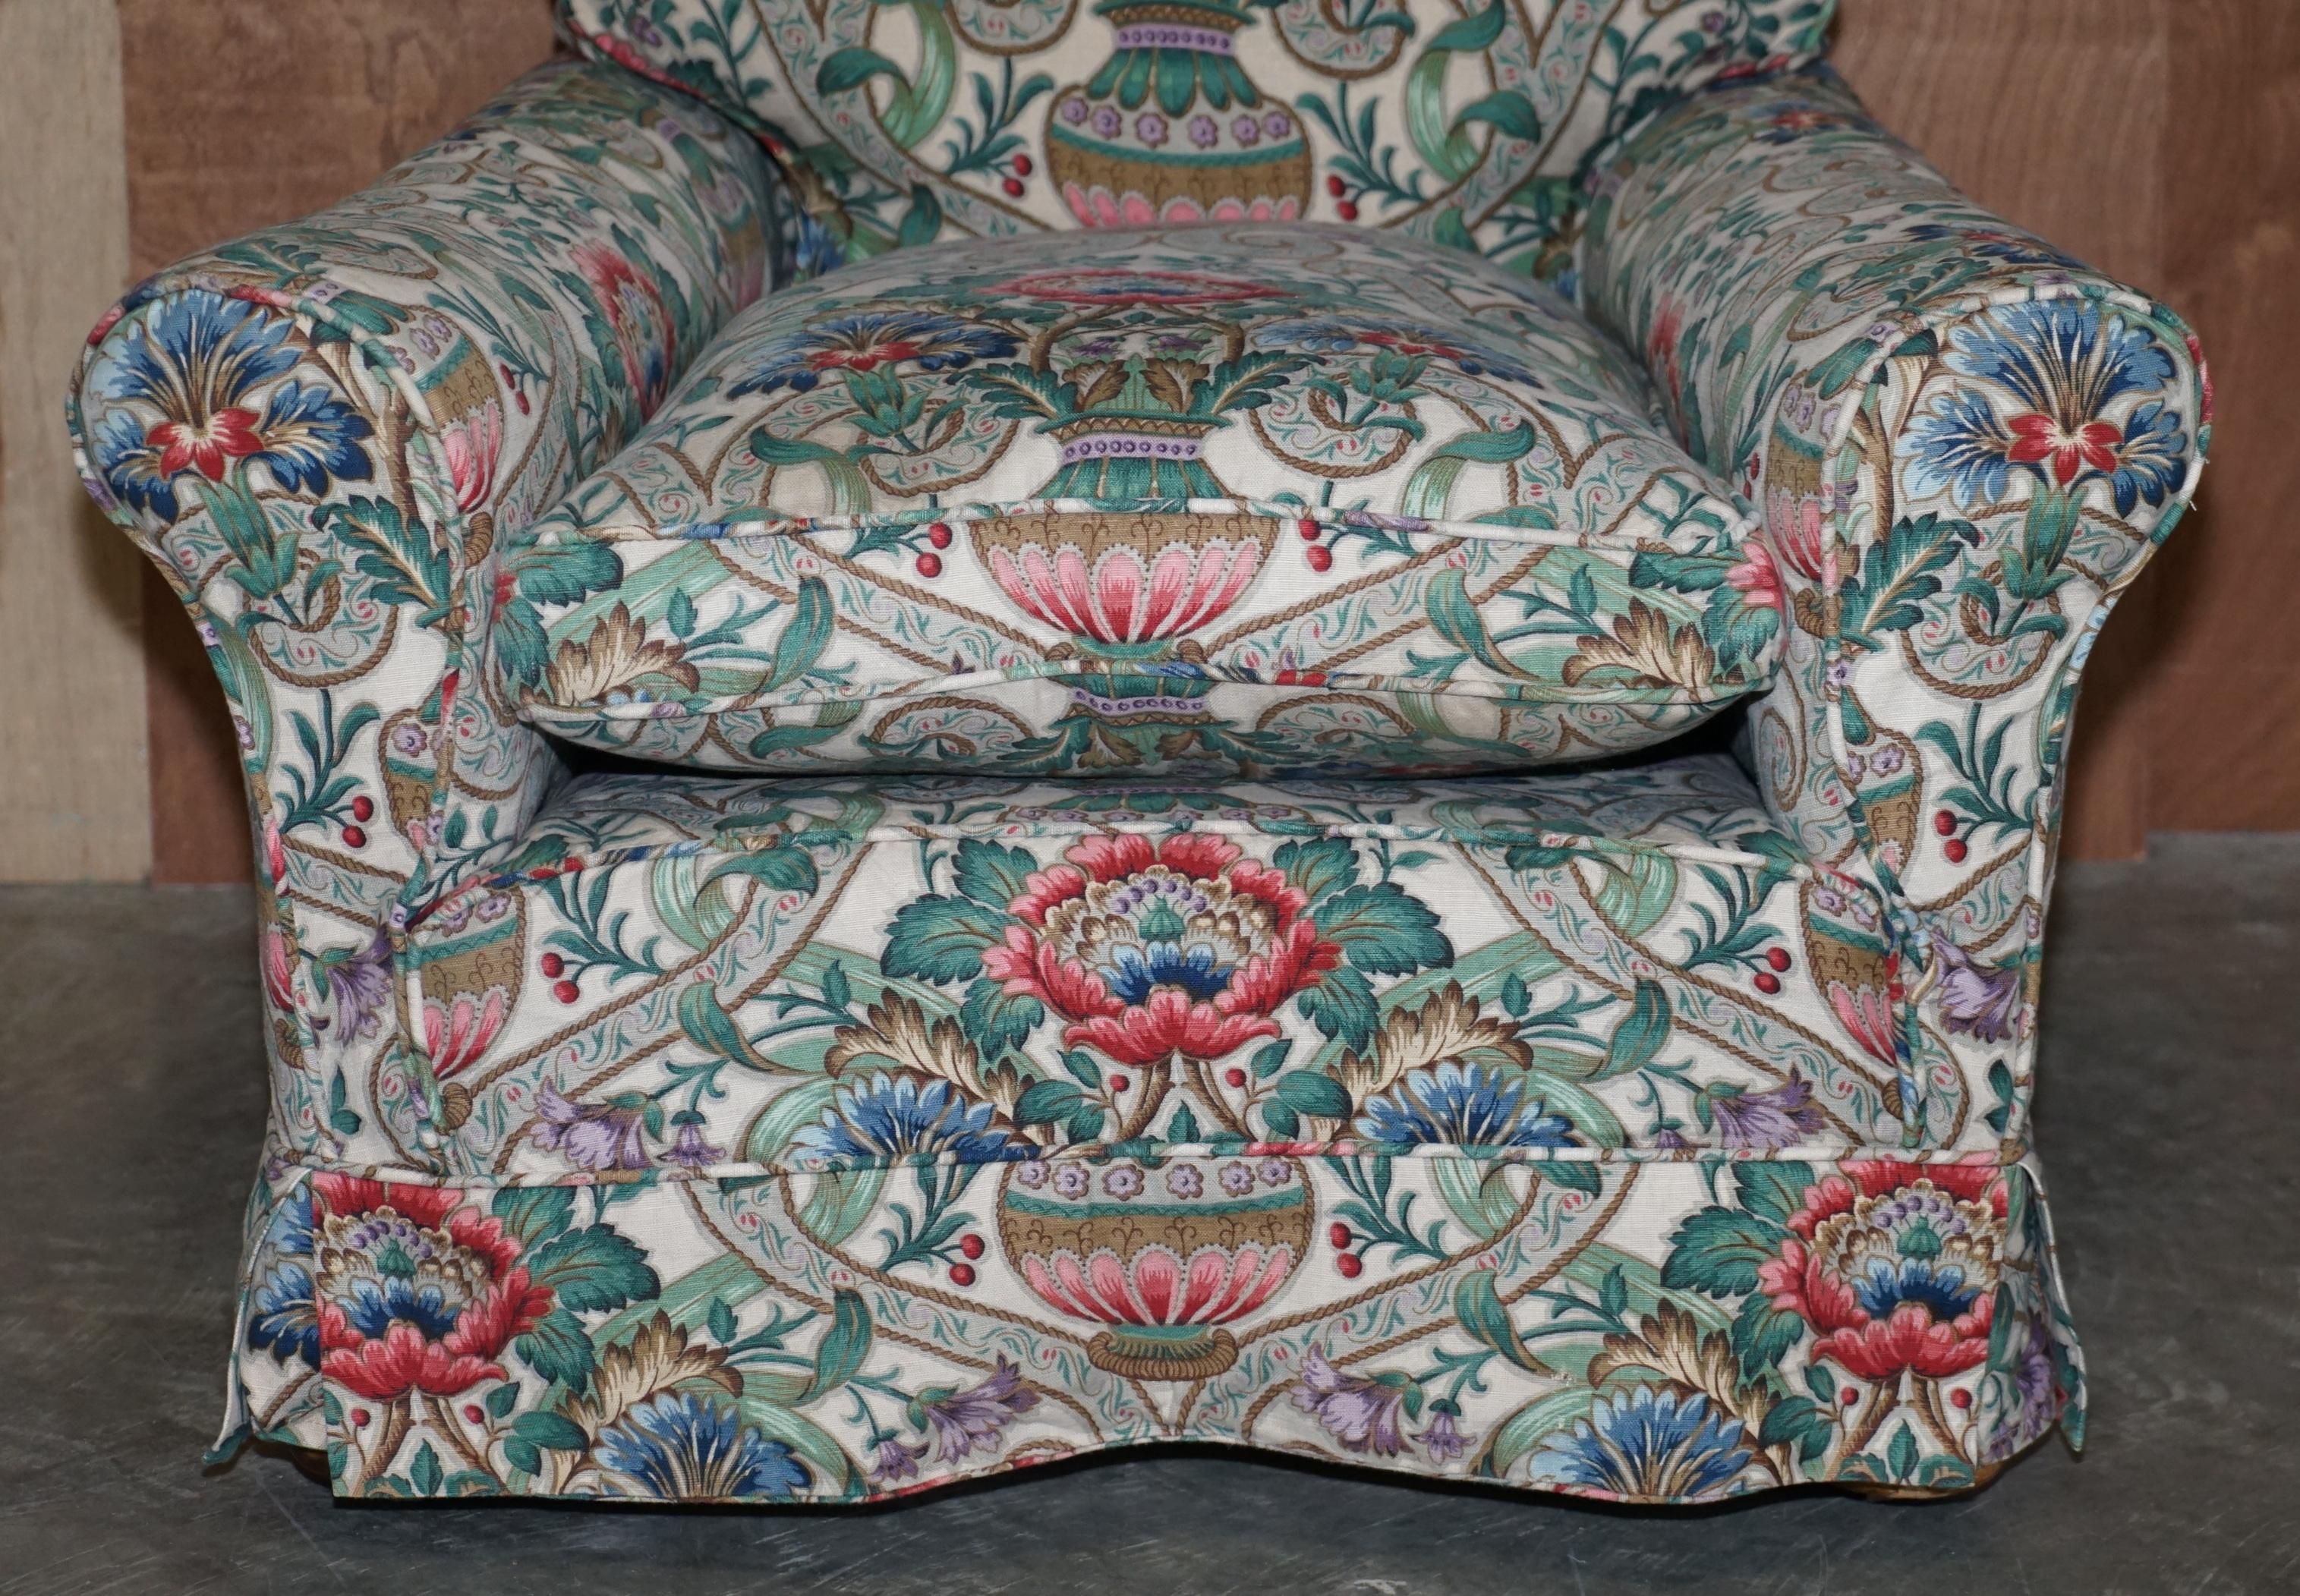 Antique Victorian circa 1900 Club Armchair with Chintz Embroidered Upholstery For Sale 1